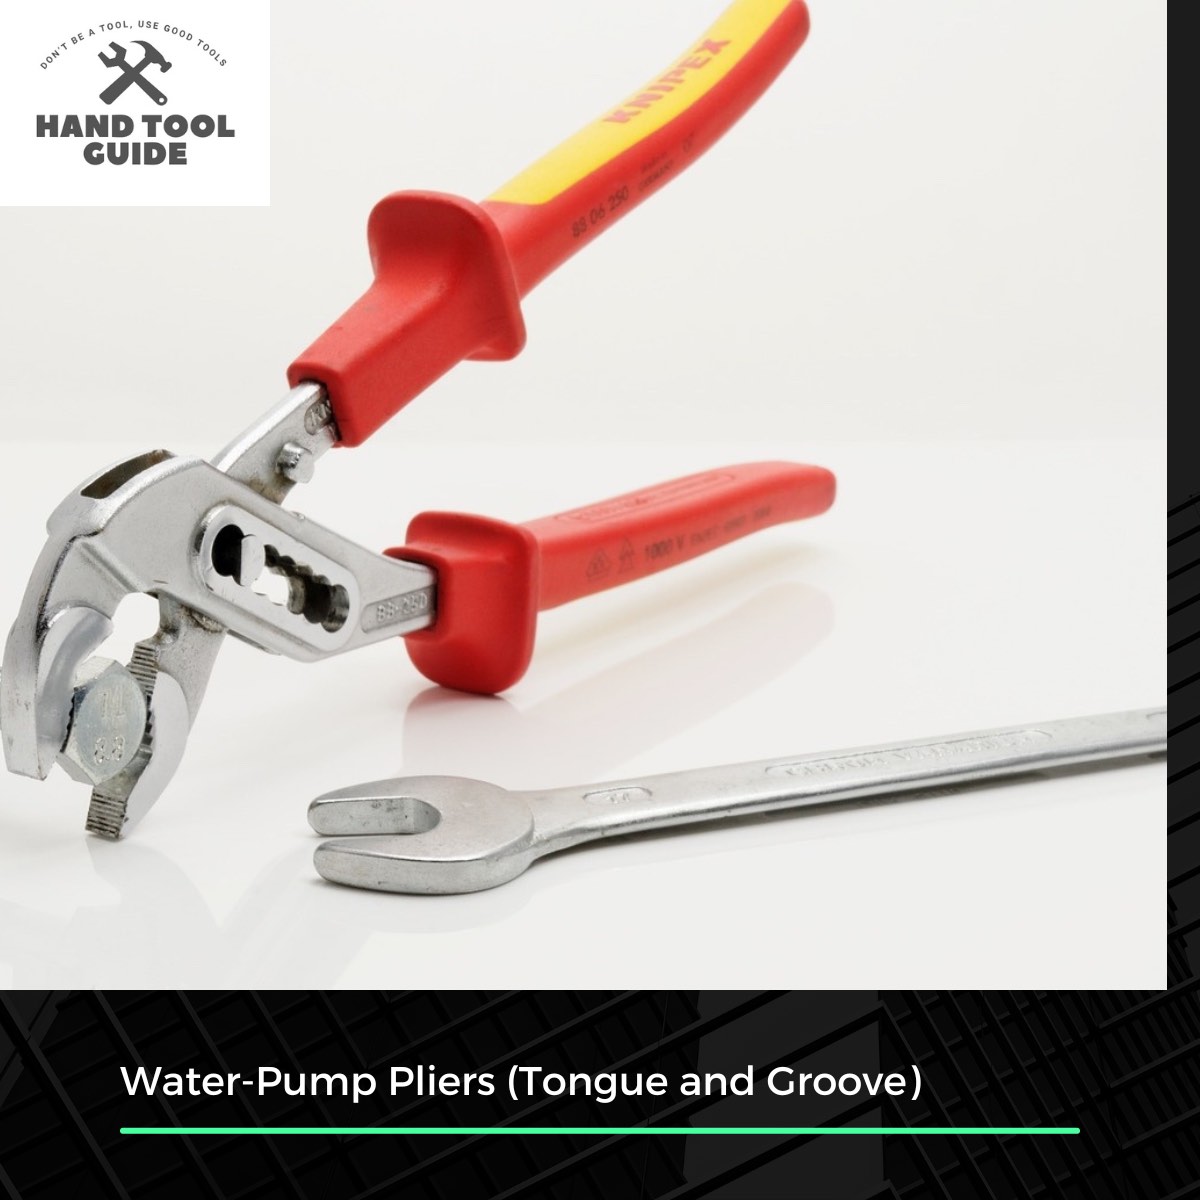 Water-Pump Pliers (Tongue and Groove)